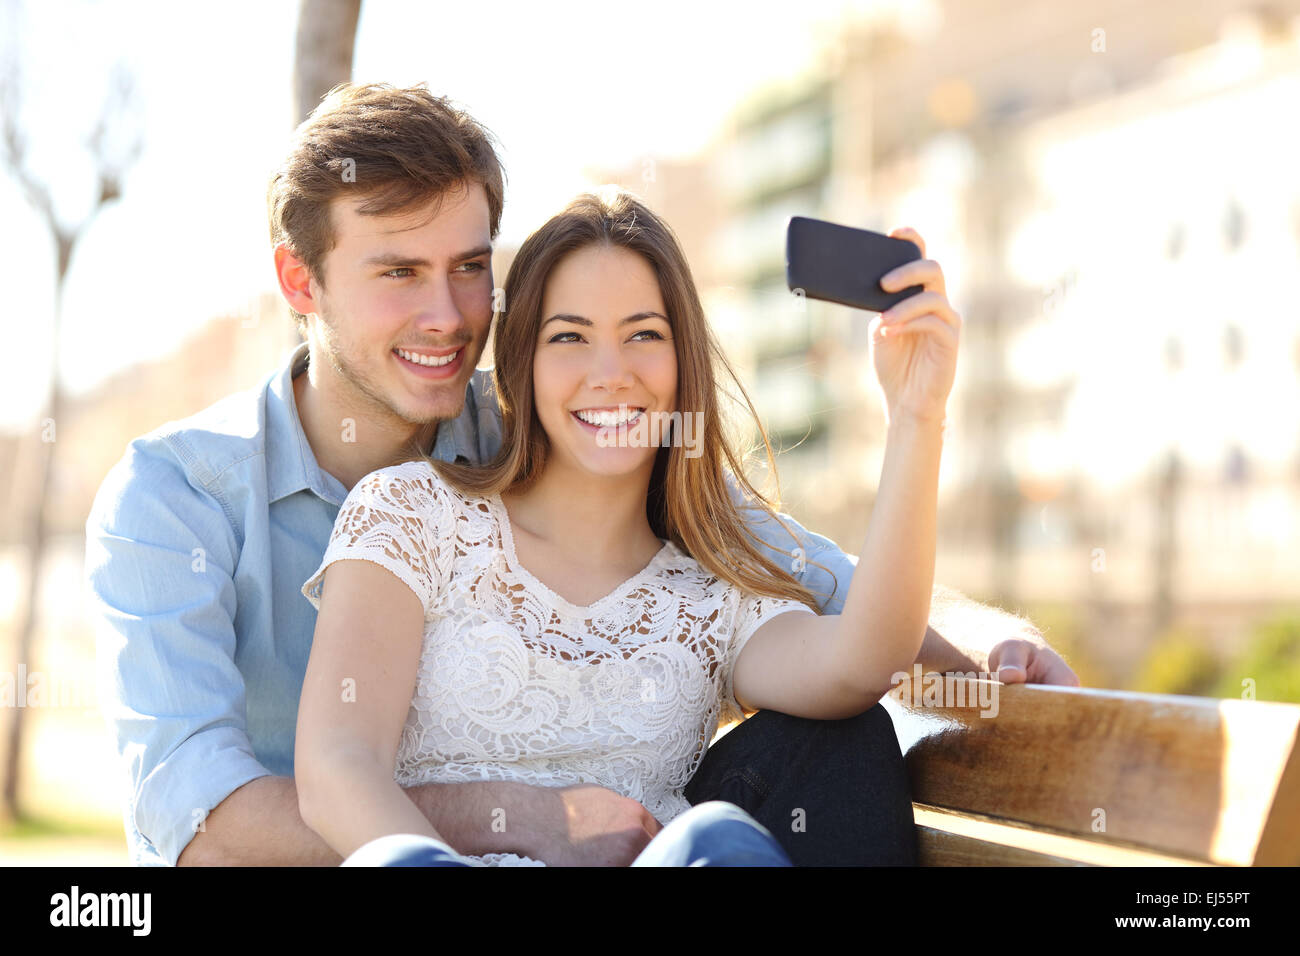 Young Married Couple Loving Pose Sitting Stock Photo 109596494 |  Shutterstock